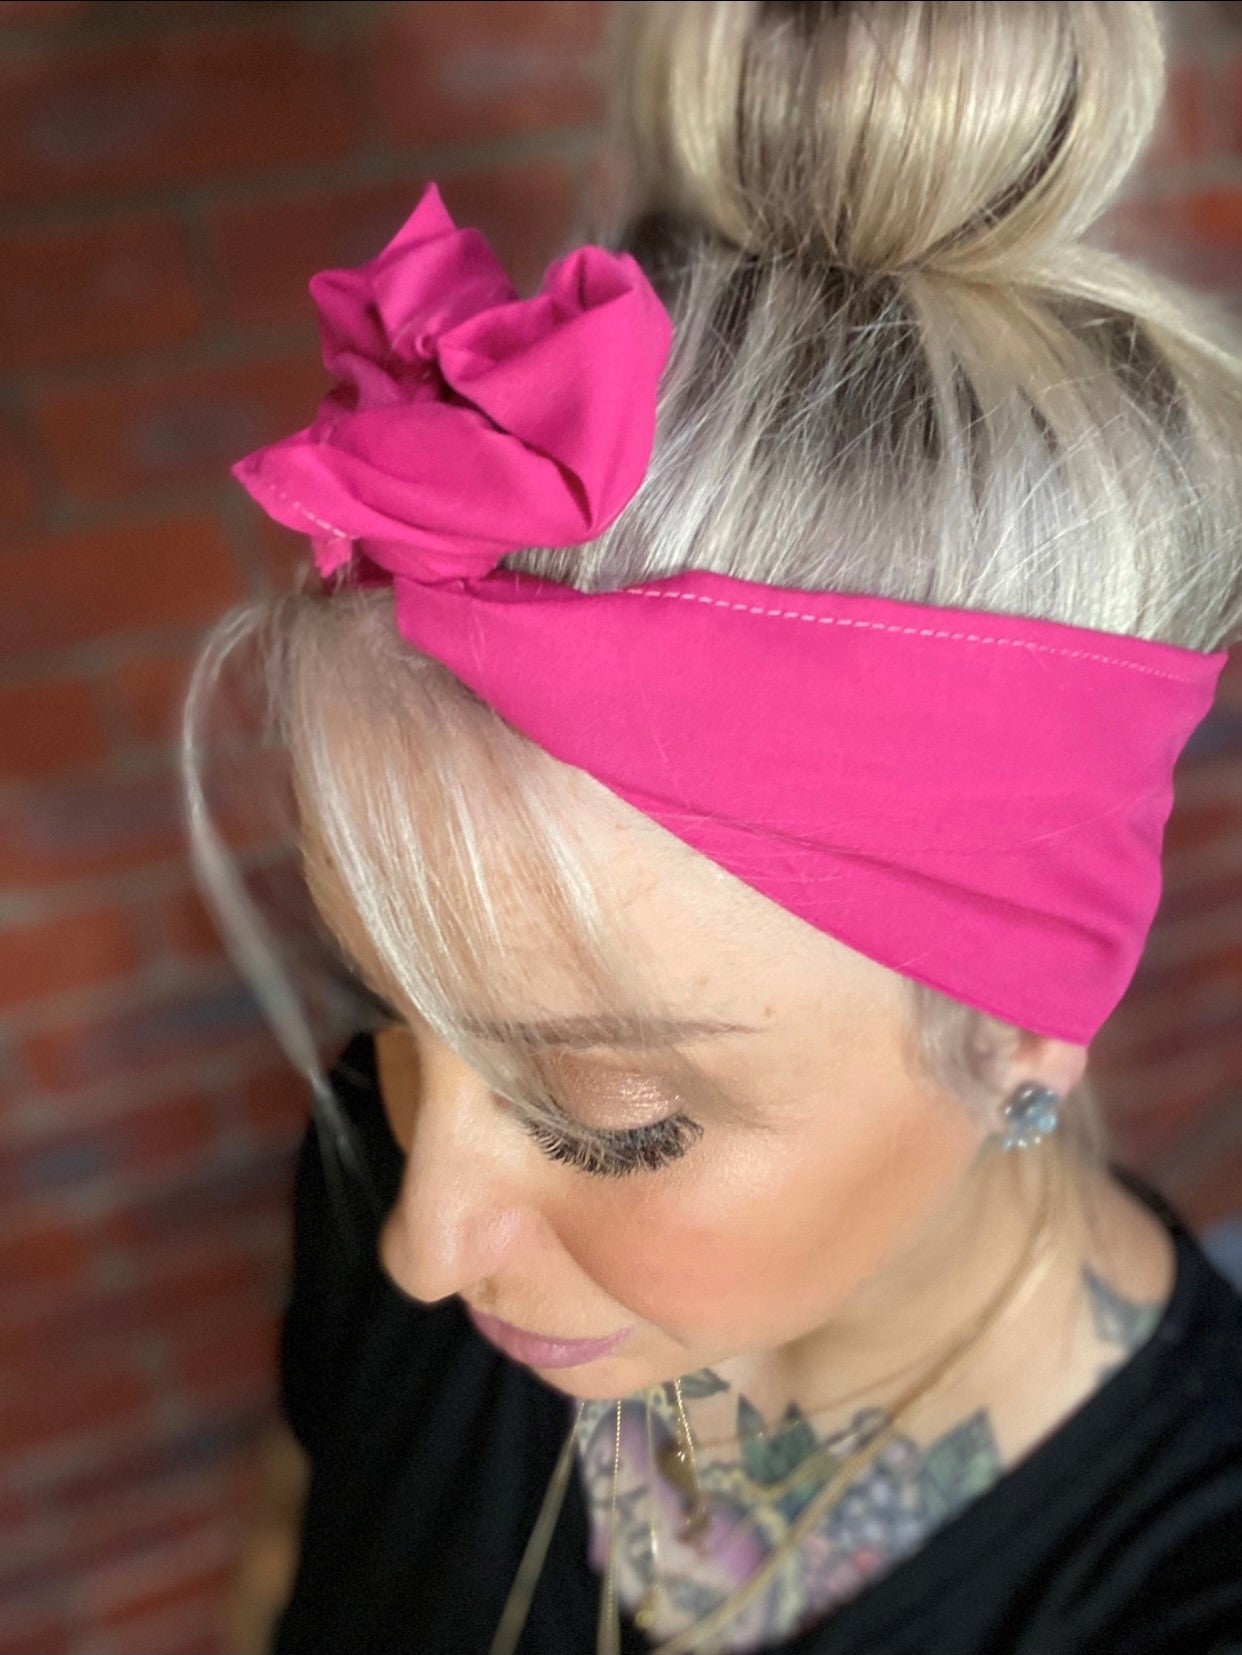 True Pink Boho Wire Headband - Bae Bands Australia Twist Bow Wire Headband allows for your headband to stay in place all day with no headaches,